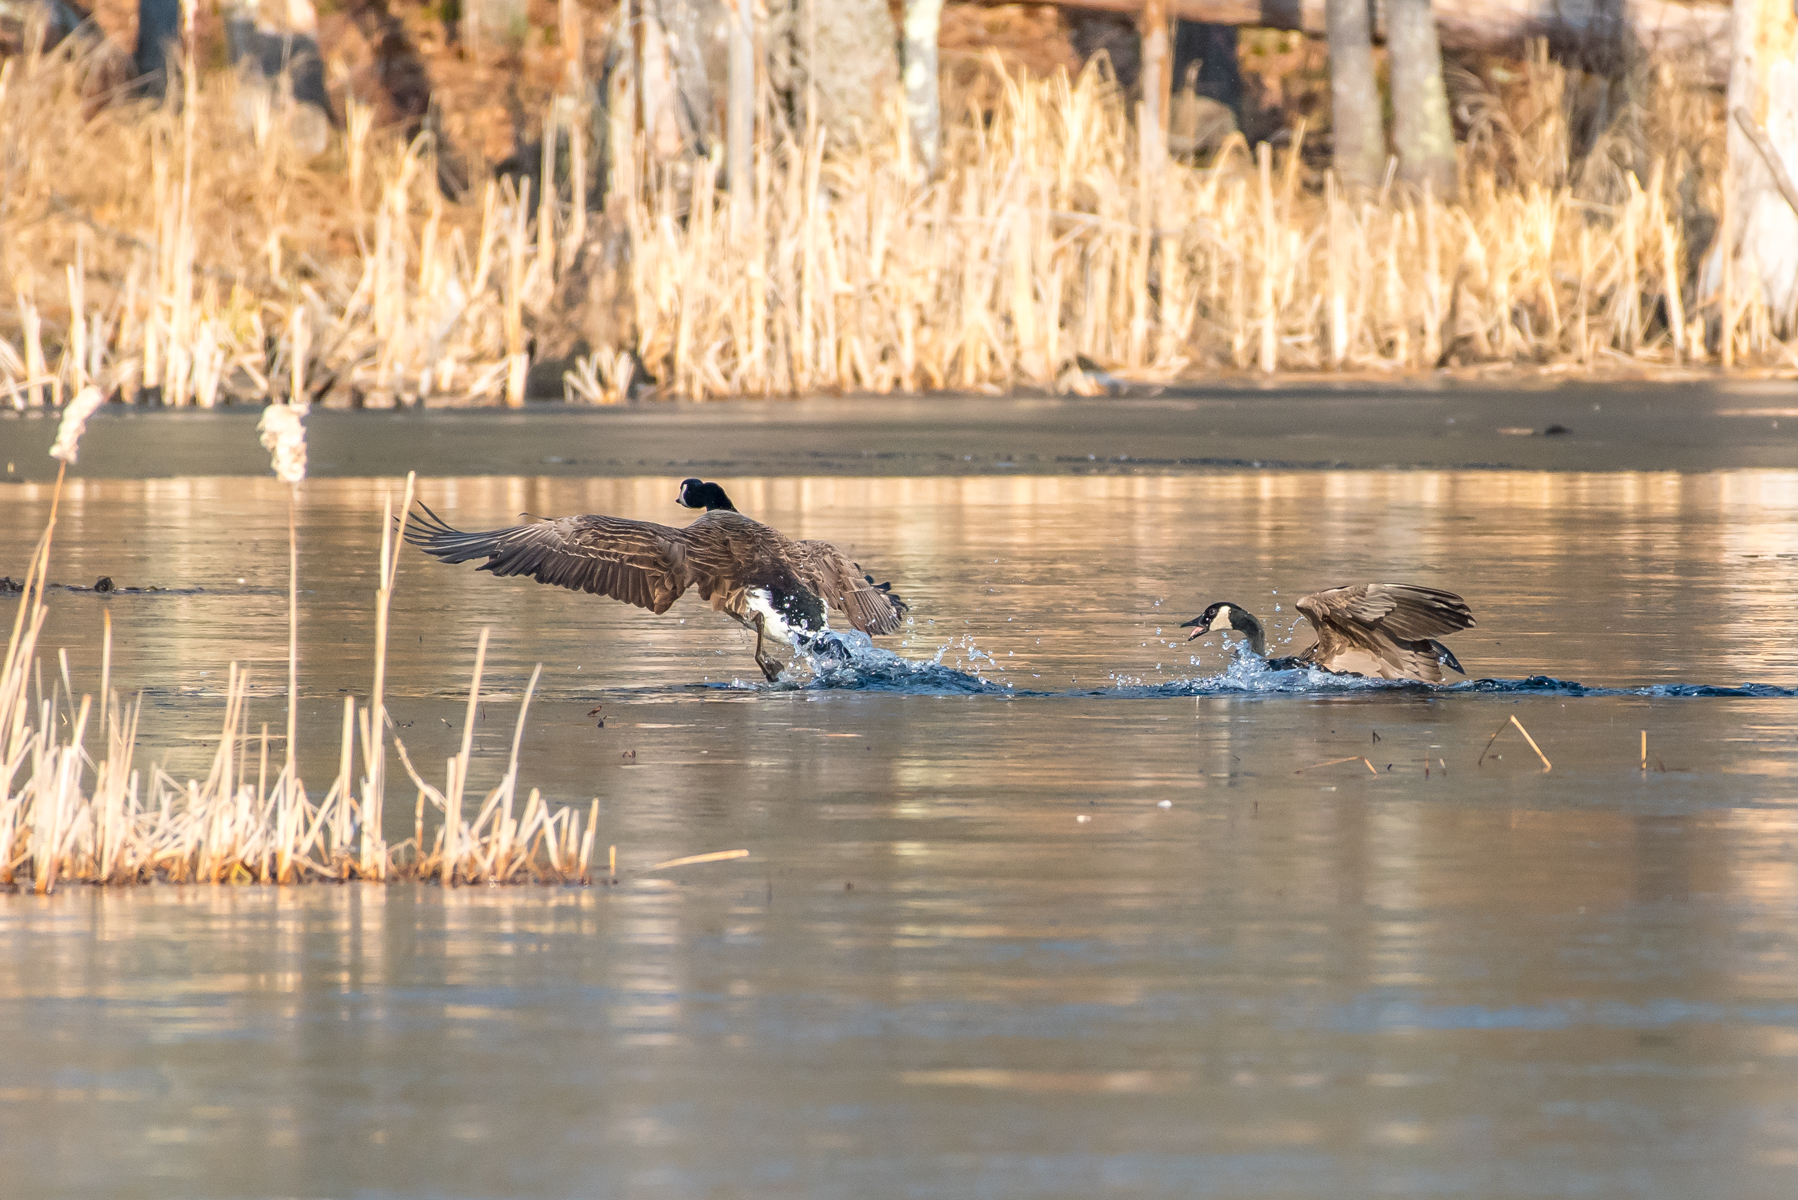   Here is one more Canada goose shot of the interloper being driven out of the pond that was already claimed. &nbsp;3/13/16  